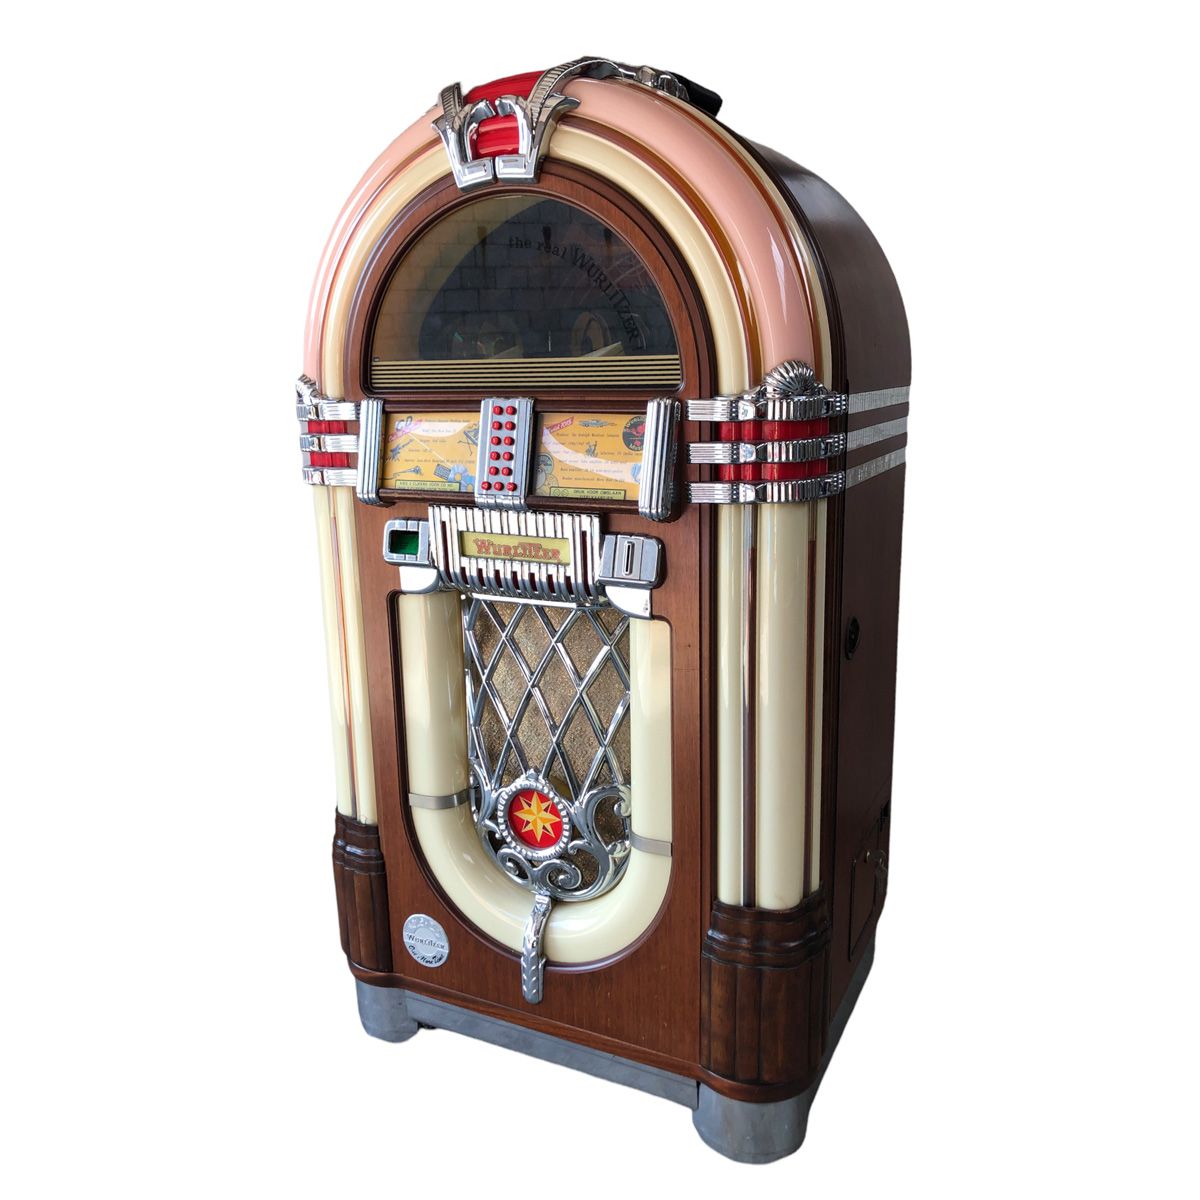 Wurlitzer OMT 1015 CD Jukebox 
One of the iconic Wurlitzer jukeboxes is the OMT &hellip;